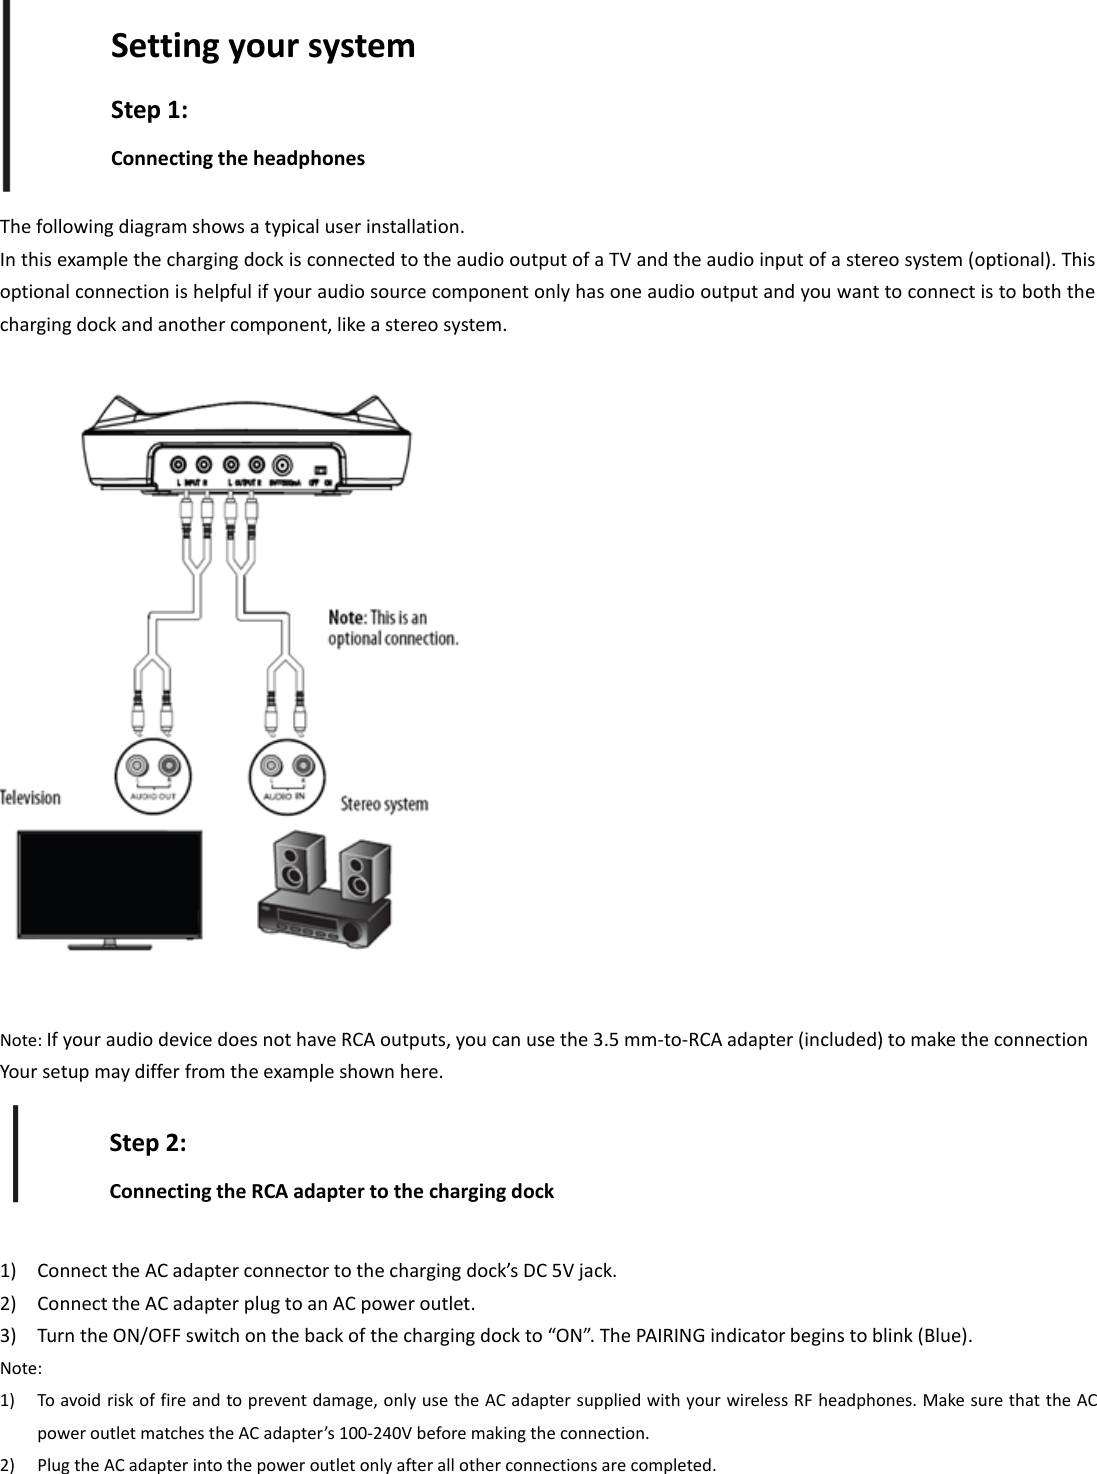 The following diagram shows a typical user installation.In this example the charging dock is connected to the audio output of a TV and the audio input of a stereo system (optional). Thisoptional connection is helpful if your audio source component only has one audio output and you want to connect is to both thecharging dock and another component, like a stereo system.Note: If your audio device does not have RCA outputs, you can use the 3.5 mm‐to‐RCA adapter (included) to make the connectionYour setup may differ from the example shown here.1) Connect the AC adapter connector to the charging dock’s DC 5V jack.2) Connect the AC adapter plug to an AC power outlet.3) Turn the ON/OFF switch on the back of the charging dock to “ON”. The PAIRING indicator begins to blink (Blue).Note:1) To avoid risk of fire and to prevent damage, only use the AC adapter supplied with your wireless RF headphones. Make sure that the ACpower outlet matches the AC adapter’s 100‐240V before making the connection.2) Plug the AC adapter into the power outlet only after all other connections are completed.Setting your systemStep 1:Connecting the headphonesStep 2:Connecting the RCA adapter to the charging dock